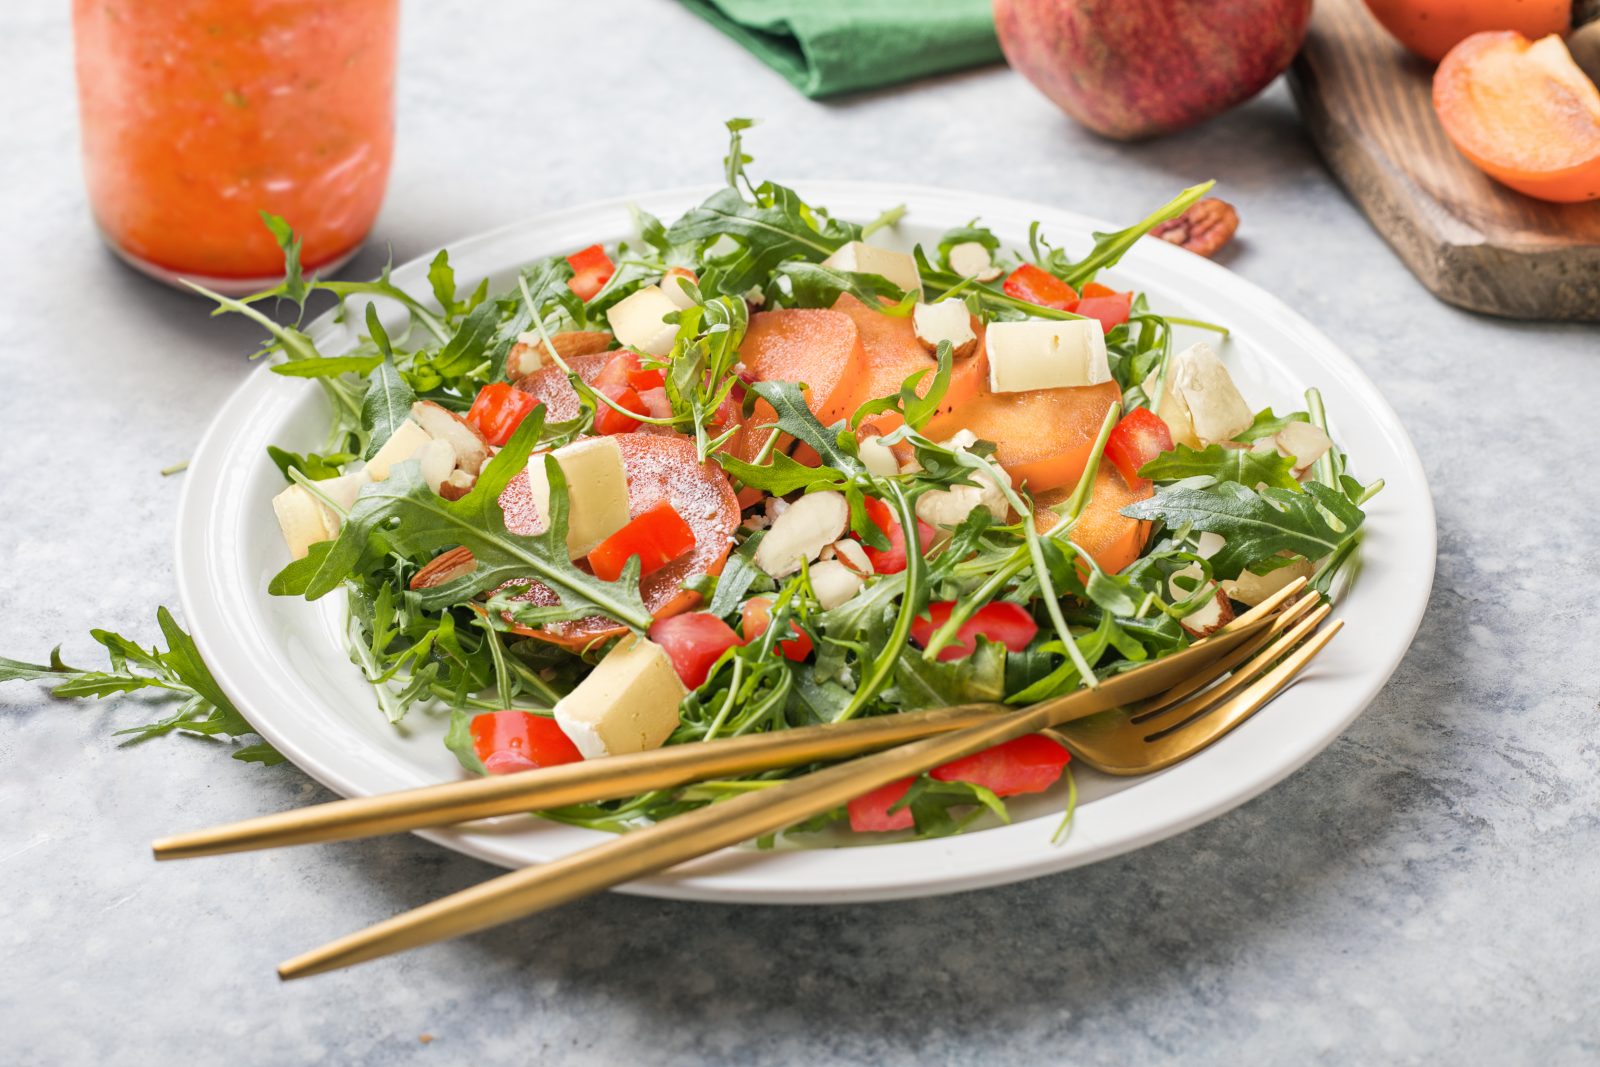 Fuyu Persimmon, Baby Arugula And Brie Cheese Salad